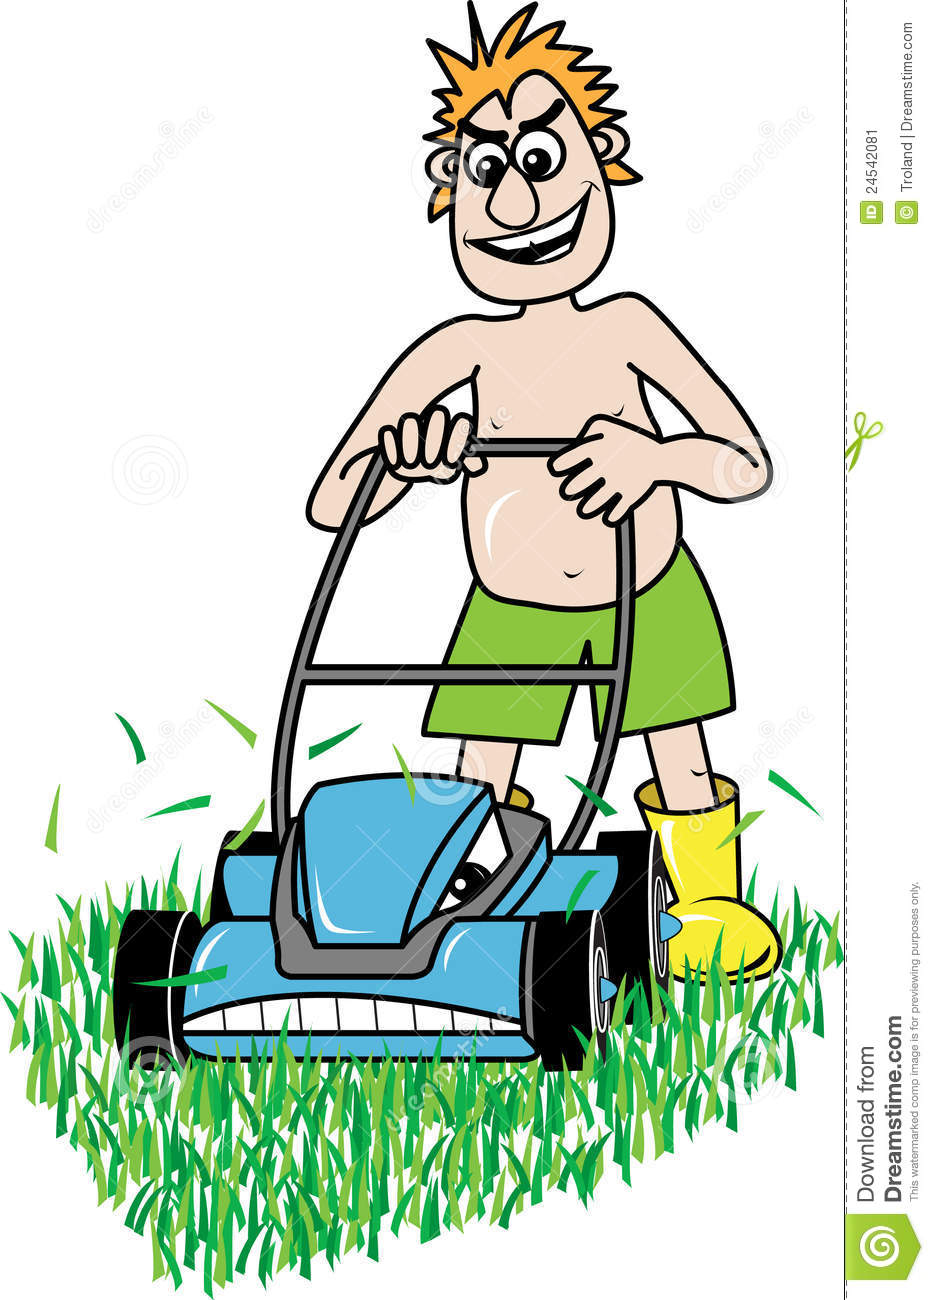 Man Mowing Lawn Clipart Lawn Mowing